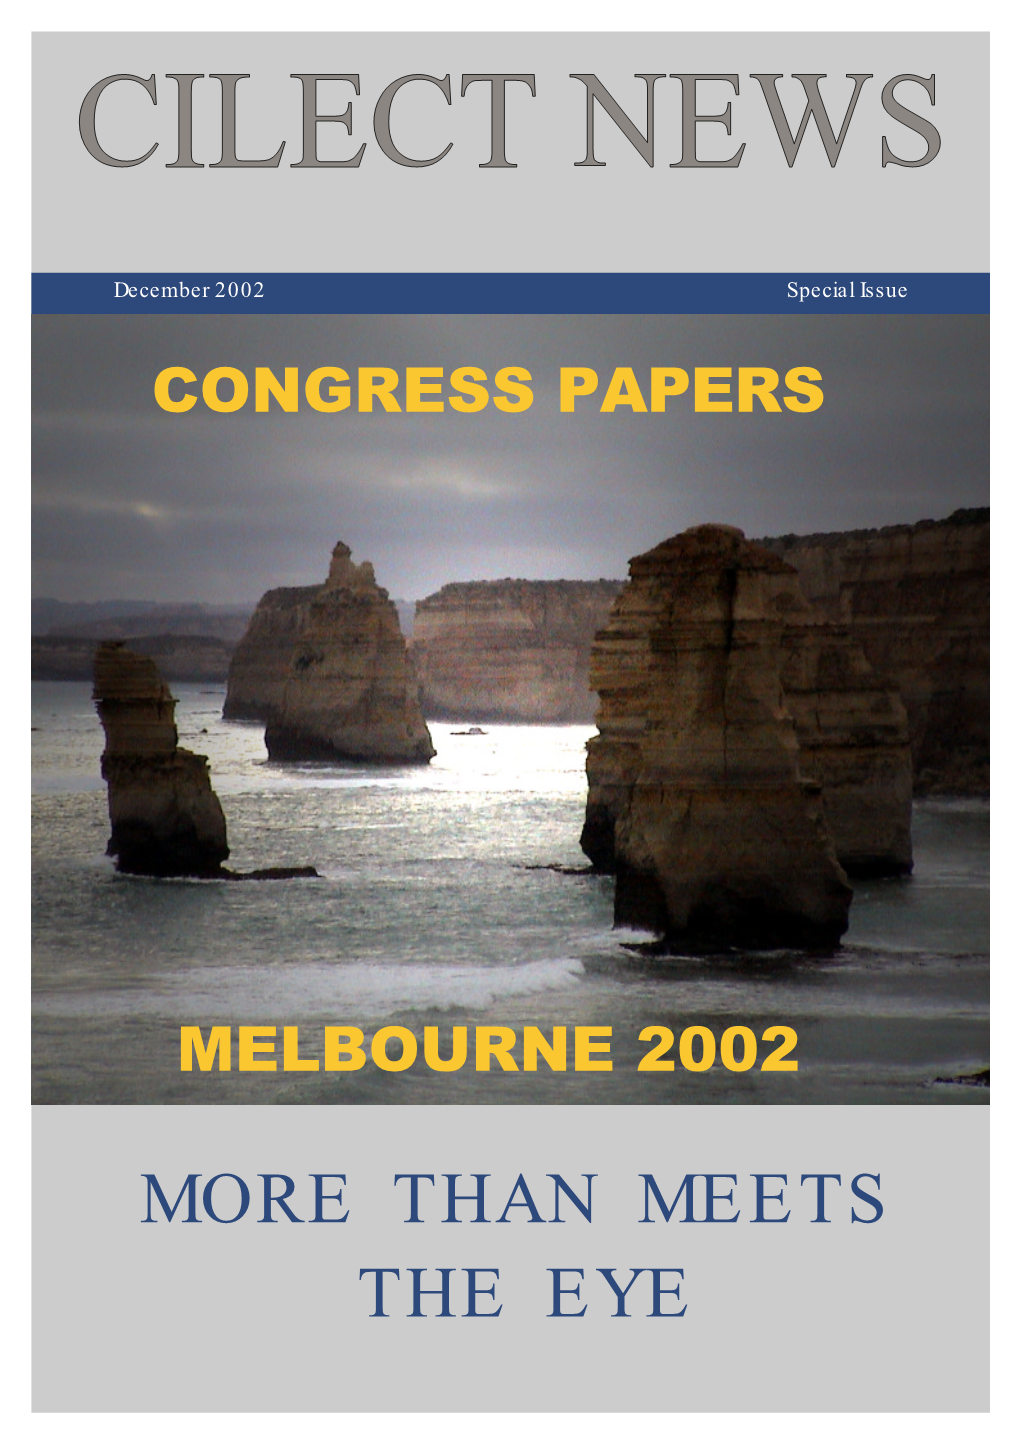 Congress Papers Melbourne 2002